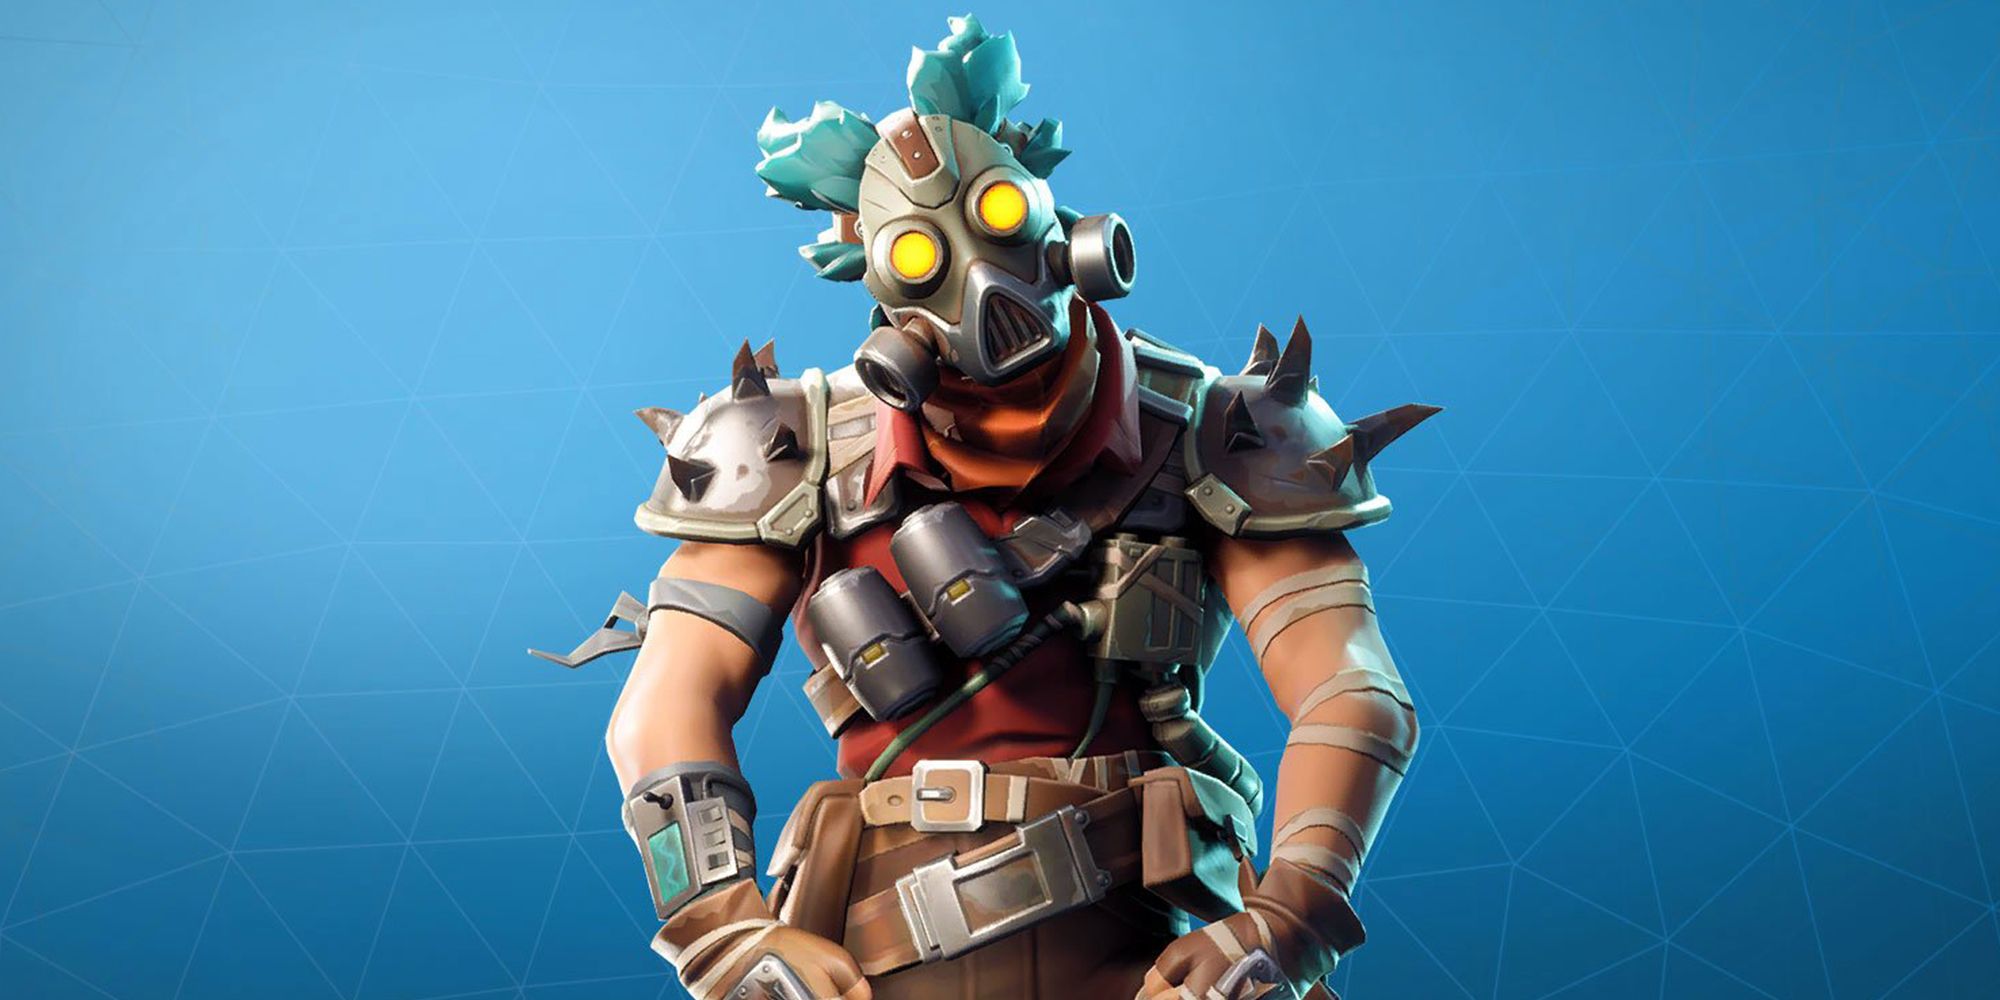 Ruckus standing against a blue background in Fortnite